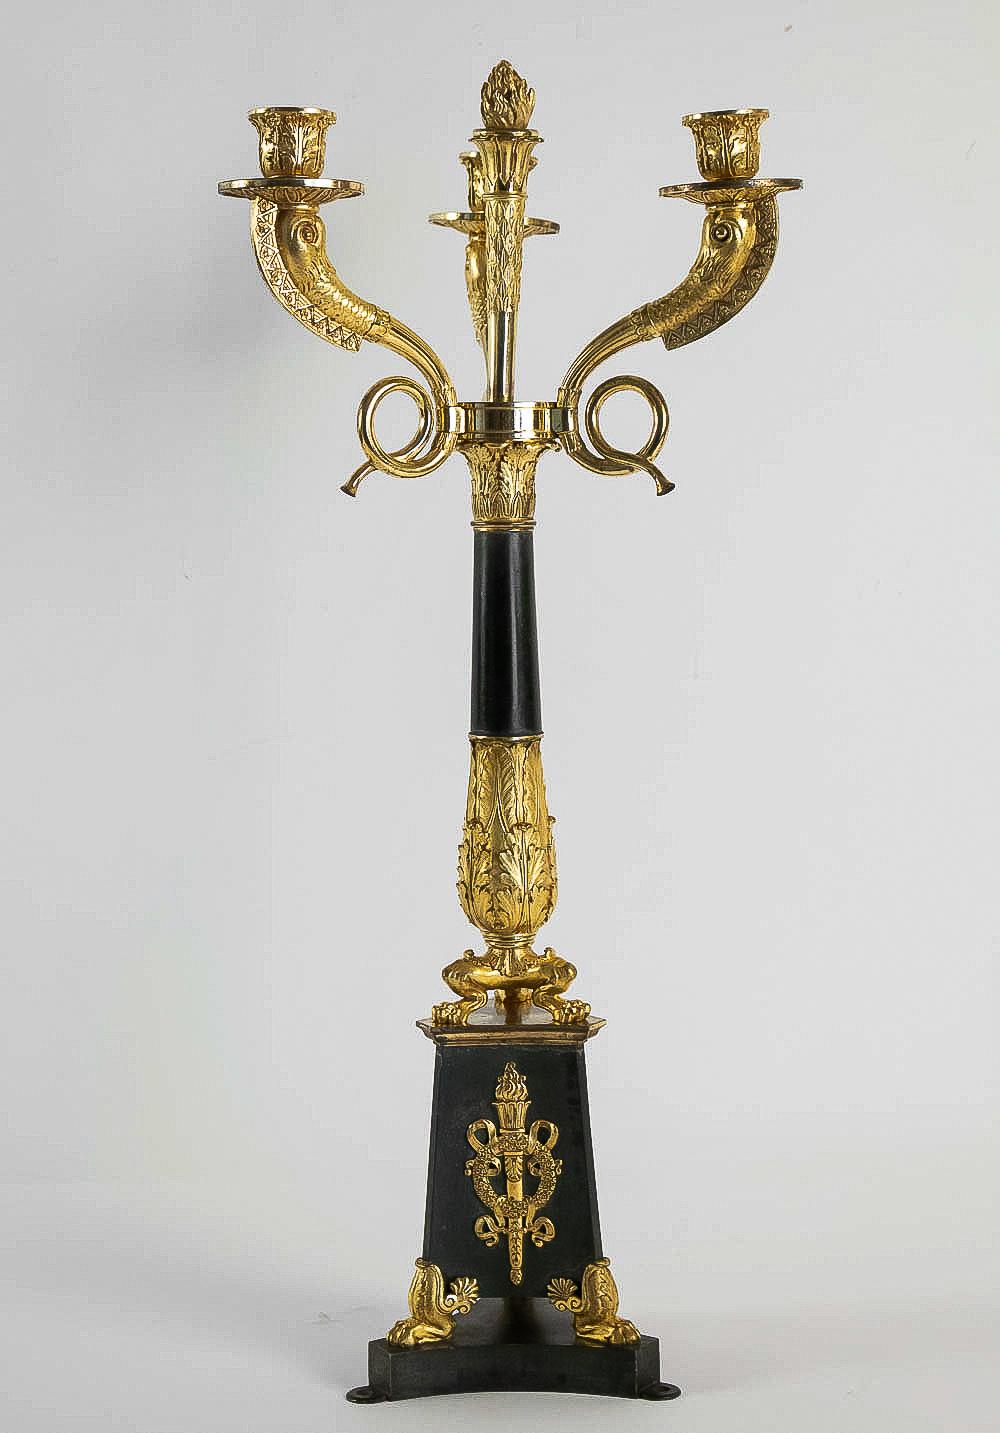 Gilt Large Pair of French Empire or Restauration Period Candelabra, Early 1800s